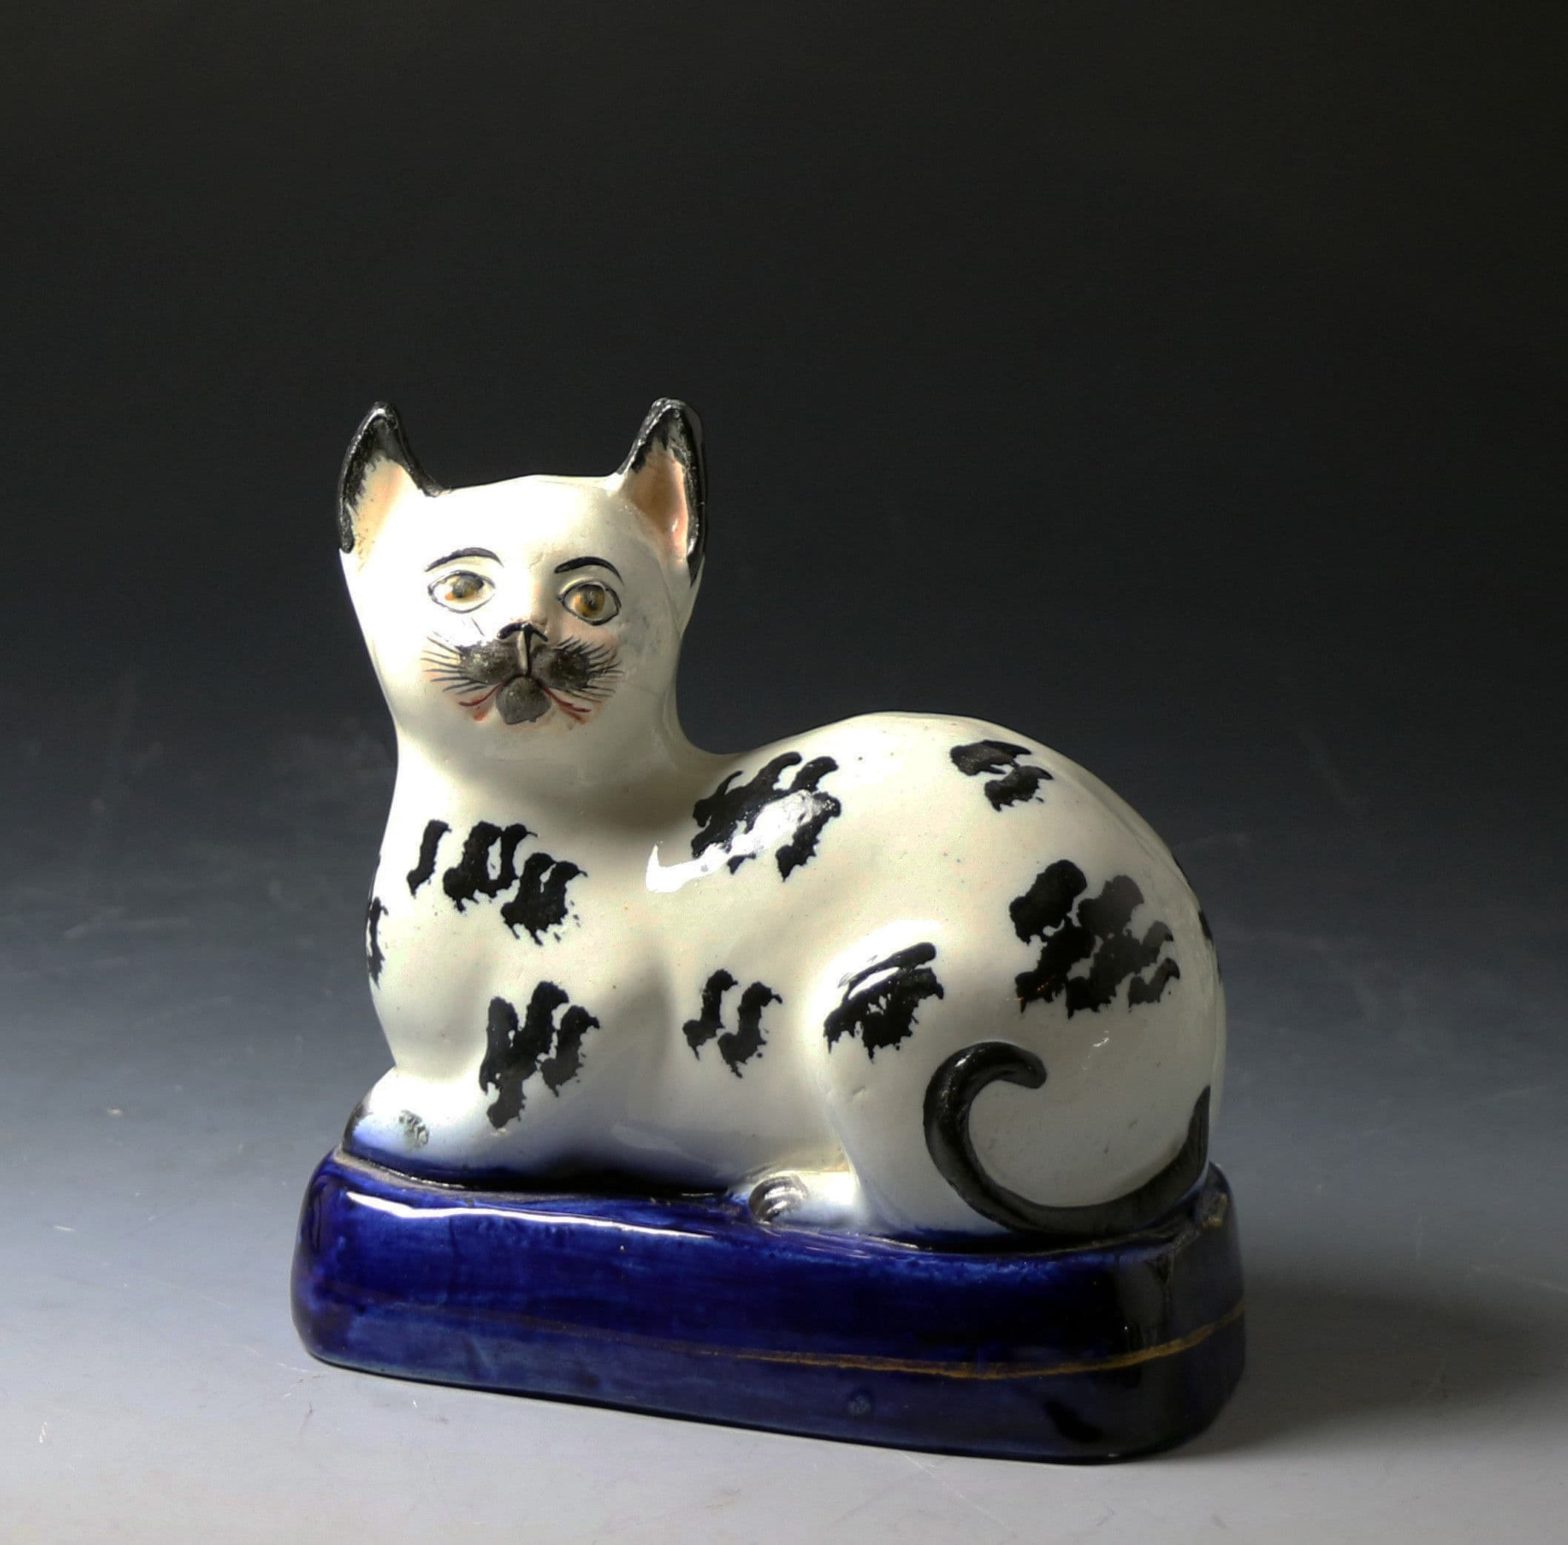 Antique Staffordshire pottery figure of a black and white cat mid 19thc